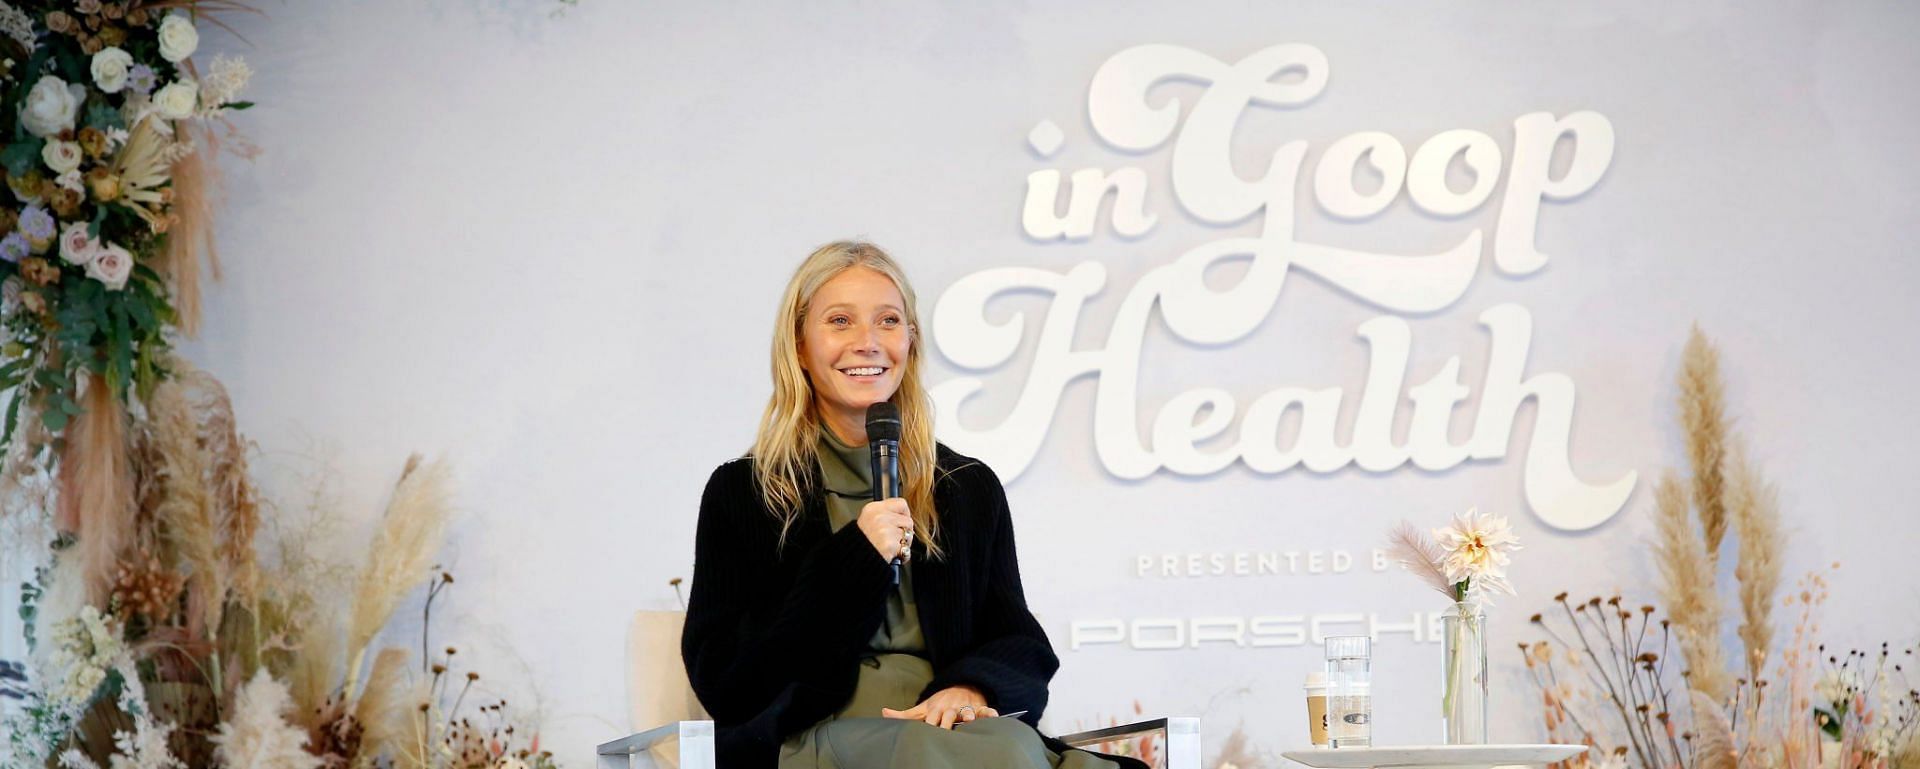 Gwyneth Paltrow faced mass criticism over diet and wellness routine (Image via Getty Images)